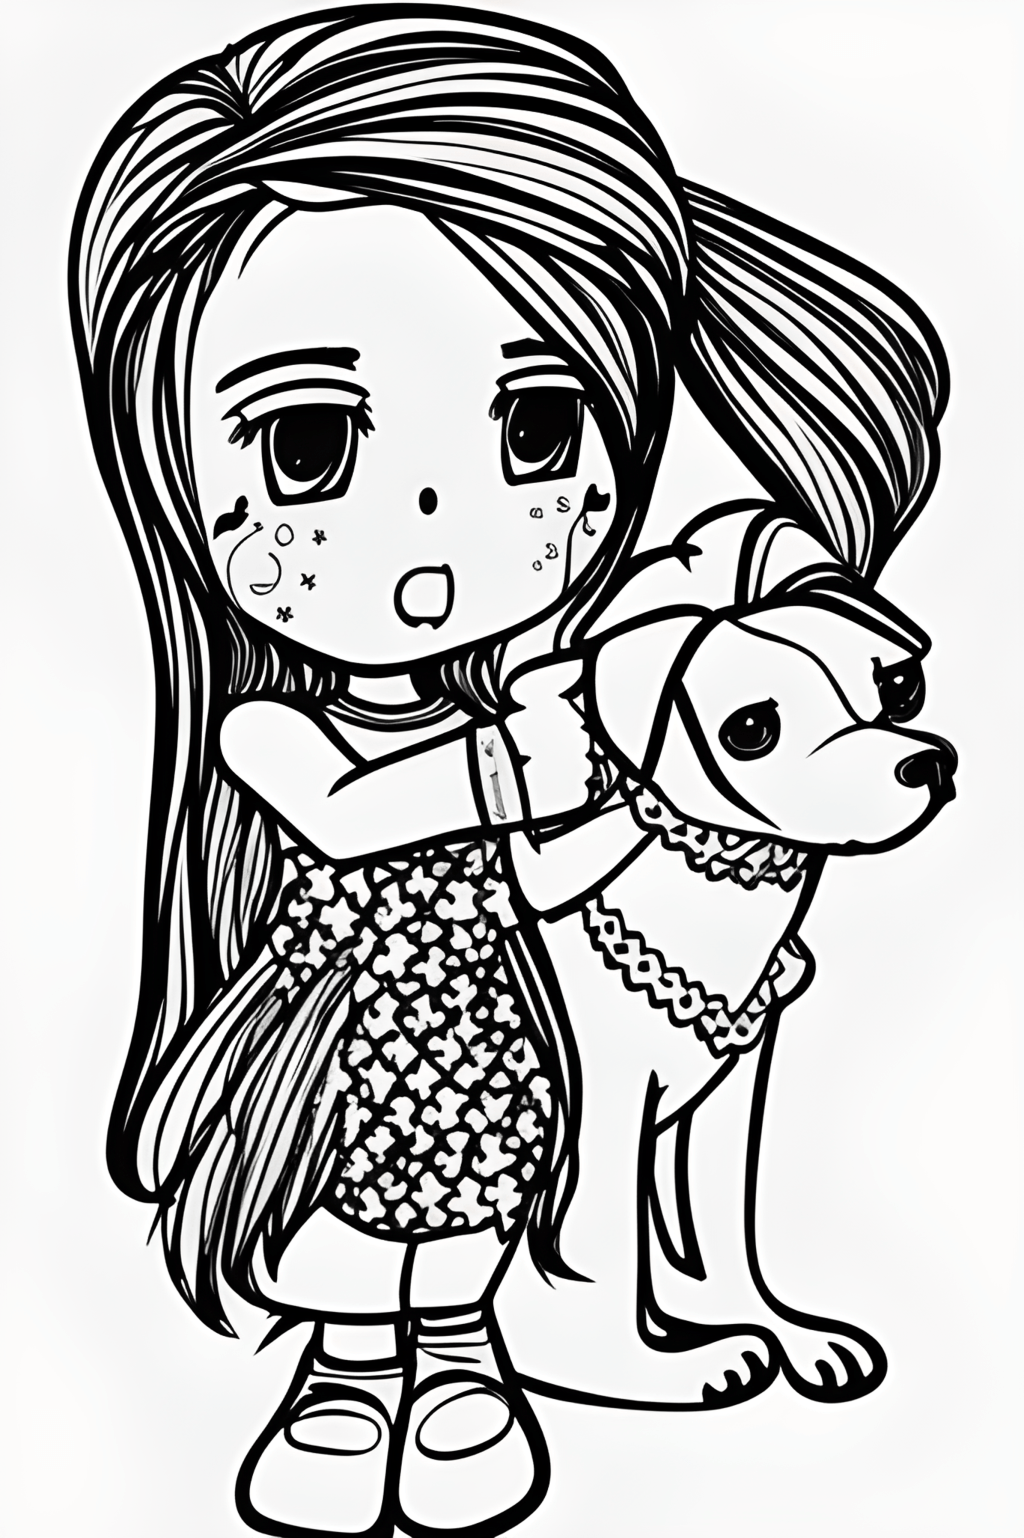 Chibi Girl with Ponytail and Dog · Creative Fabrica